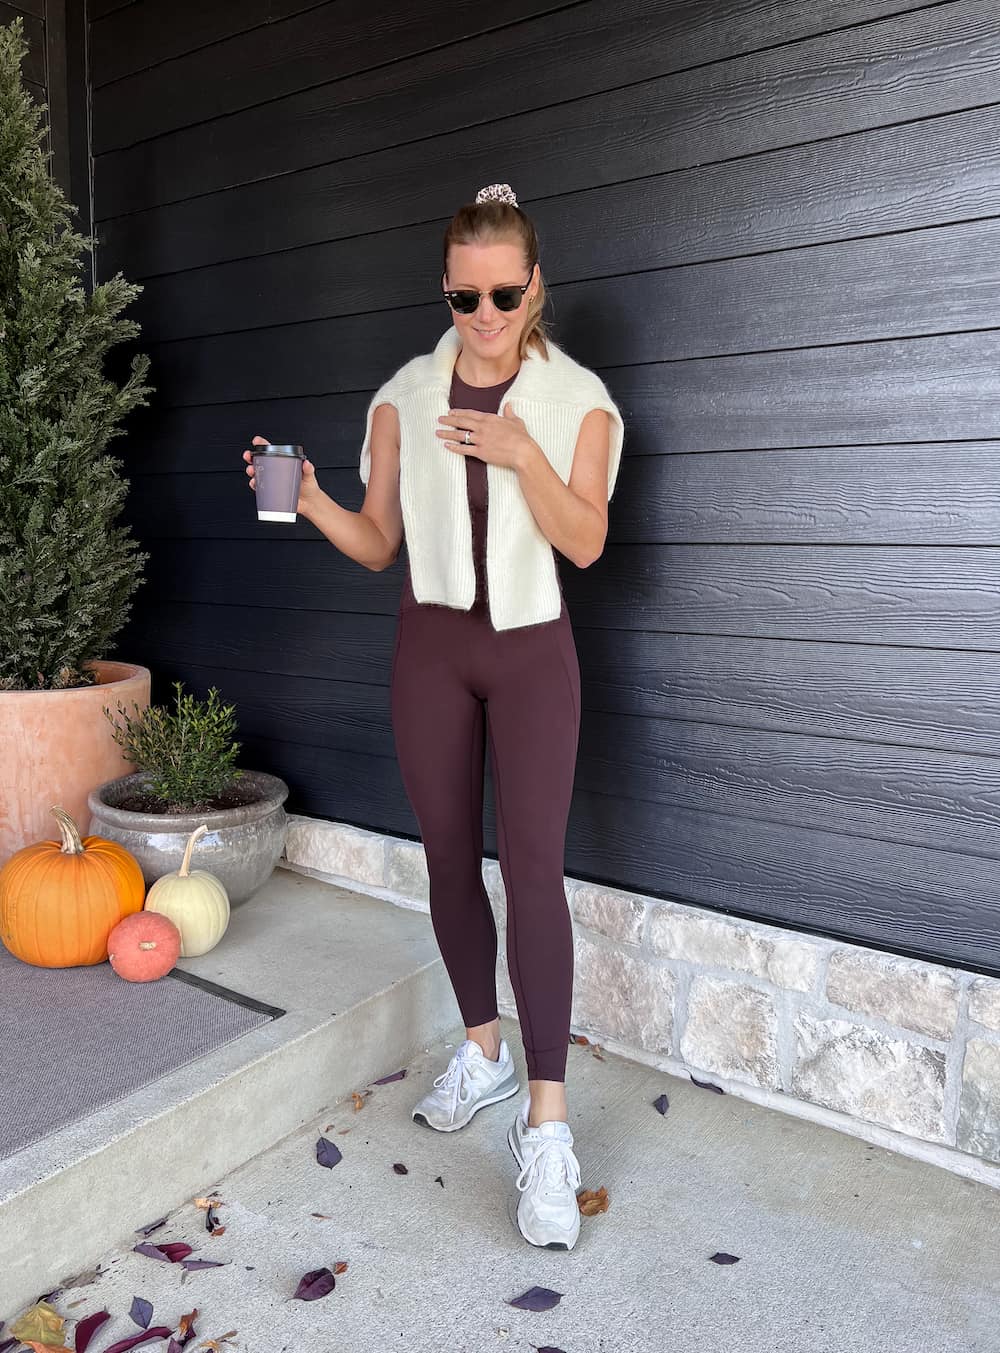 Christal wearing a brown Neiwai tank top with matching brown Neiwai leggings and white sneakers and an ivory knit Neiwai sweater over her shoulders